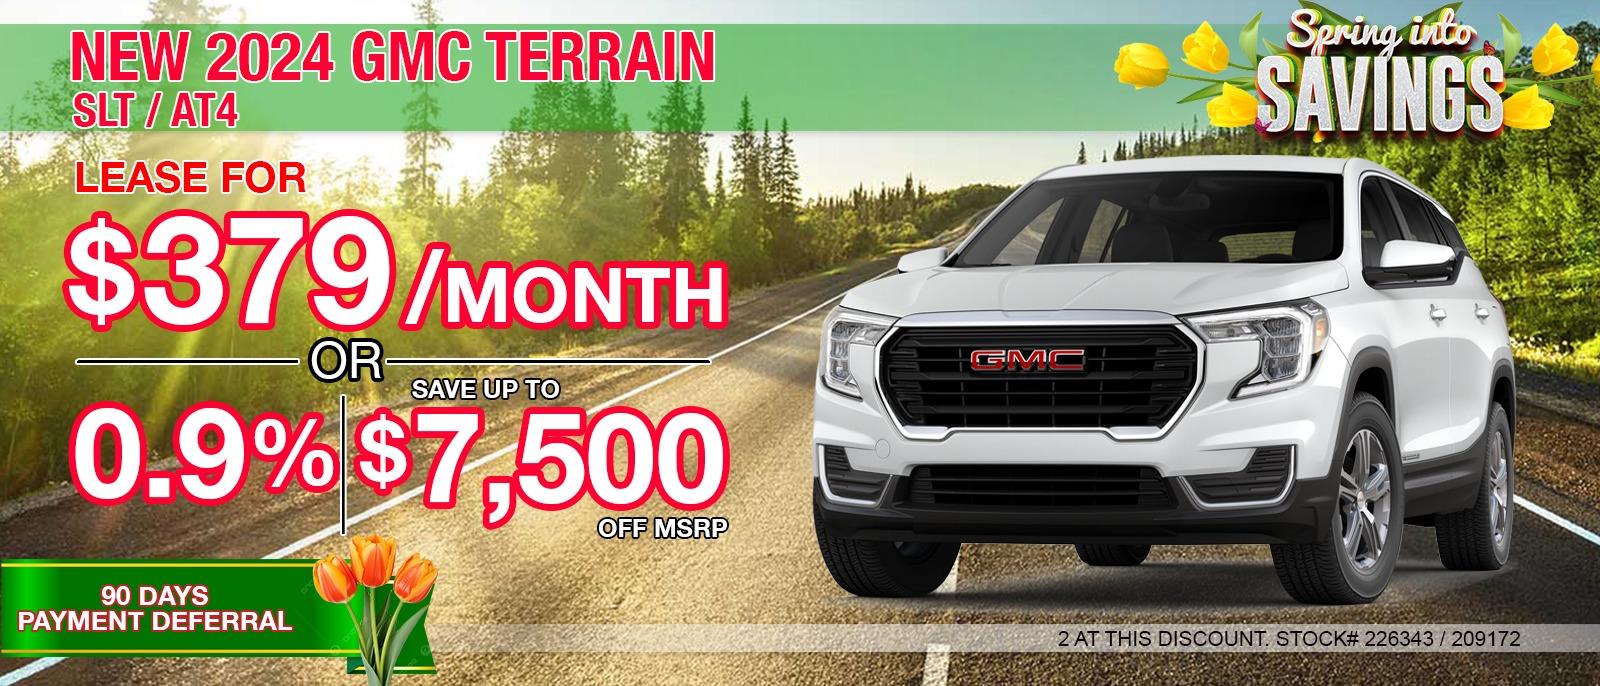 2024 GMC Terrain SLE. Your Net Savings After All Offers $7,500 OFF MSRP.